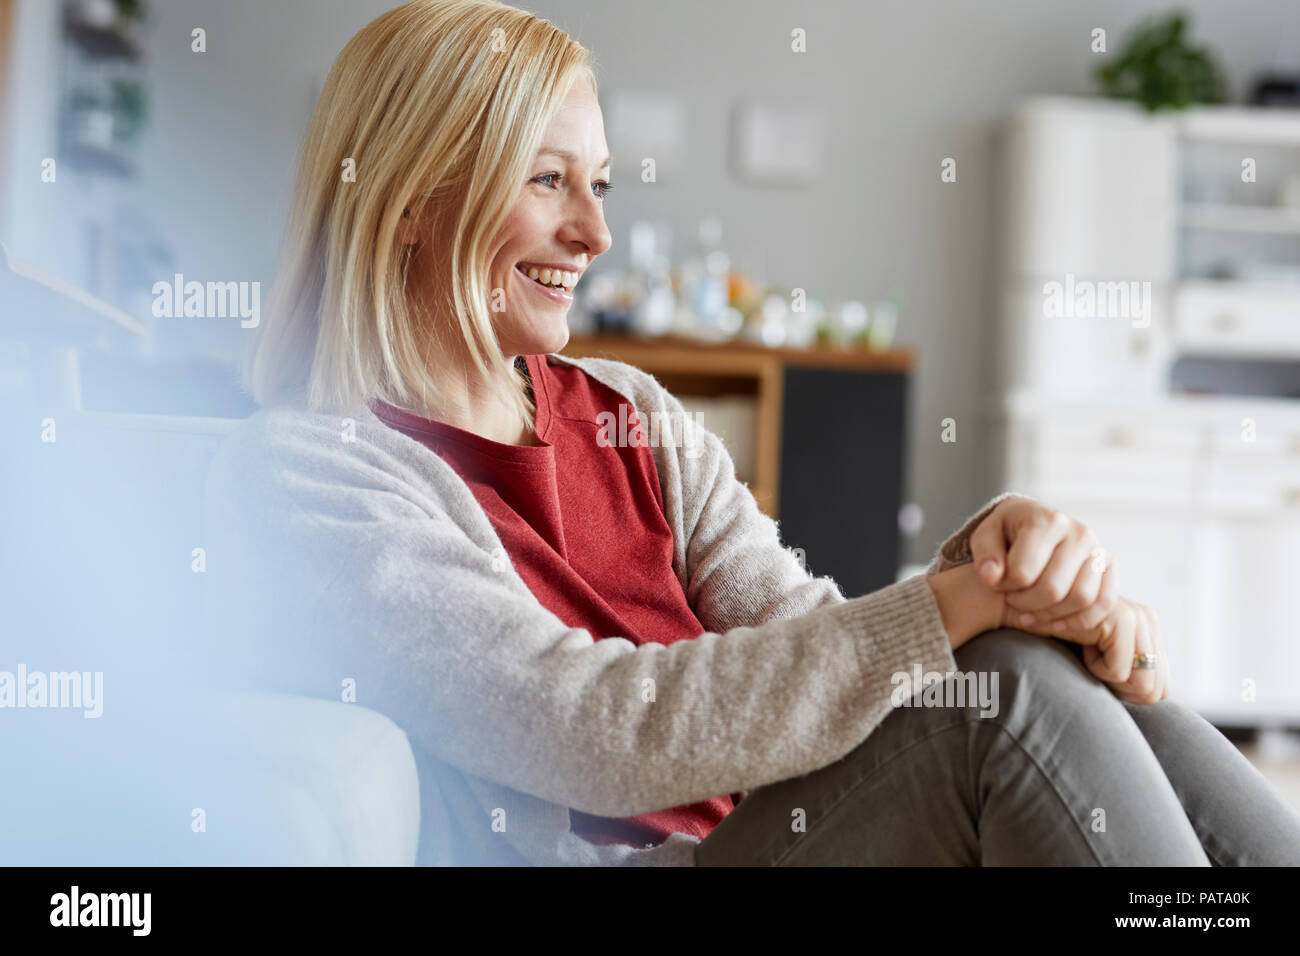 Happy woman relaxing at home Banque D'Images